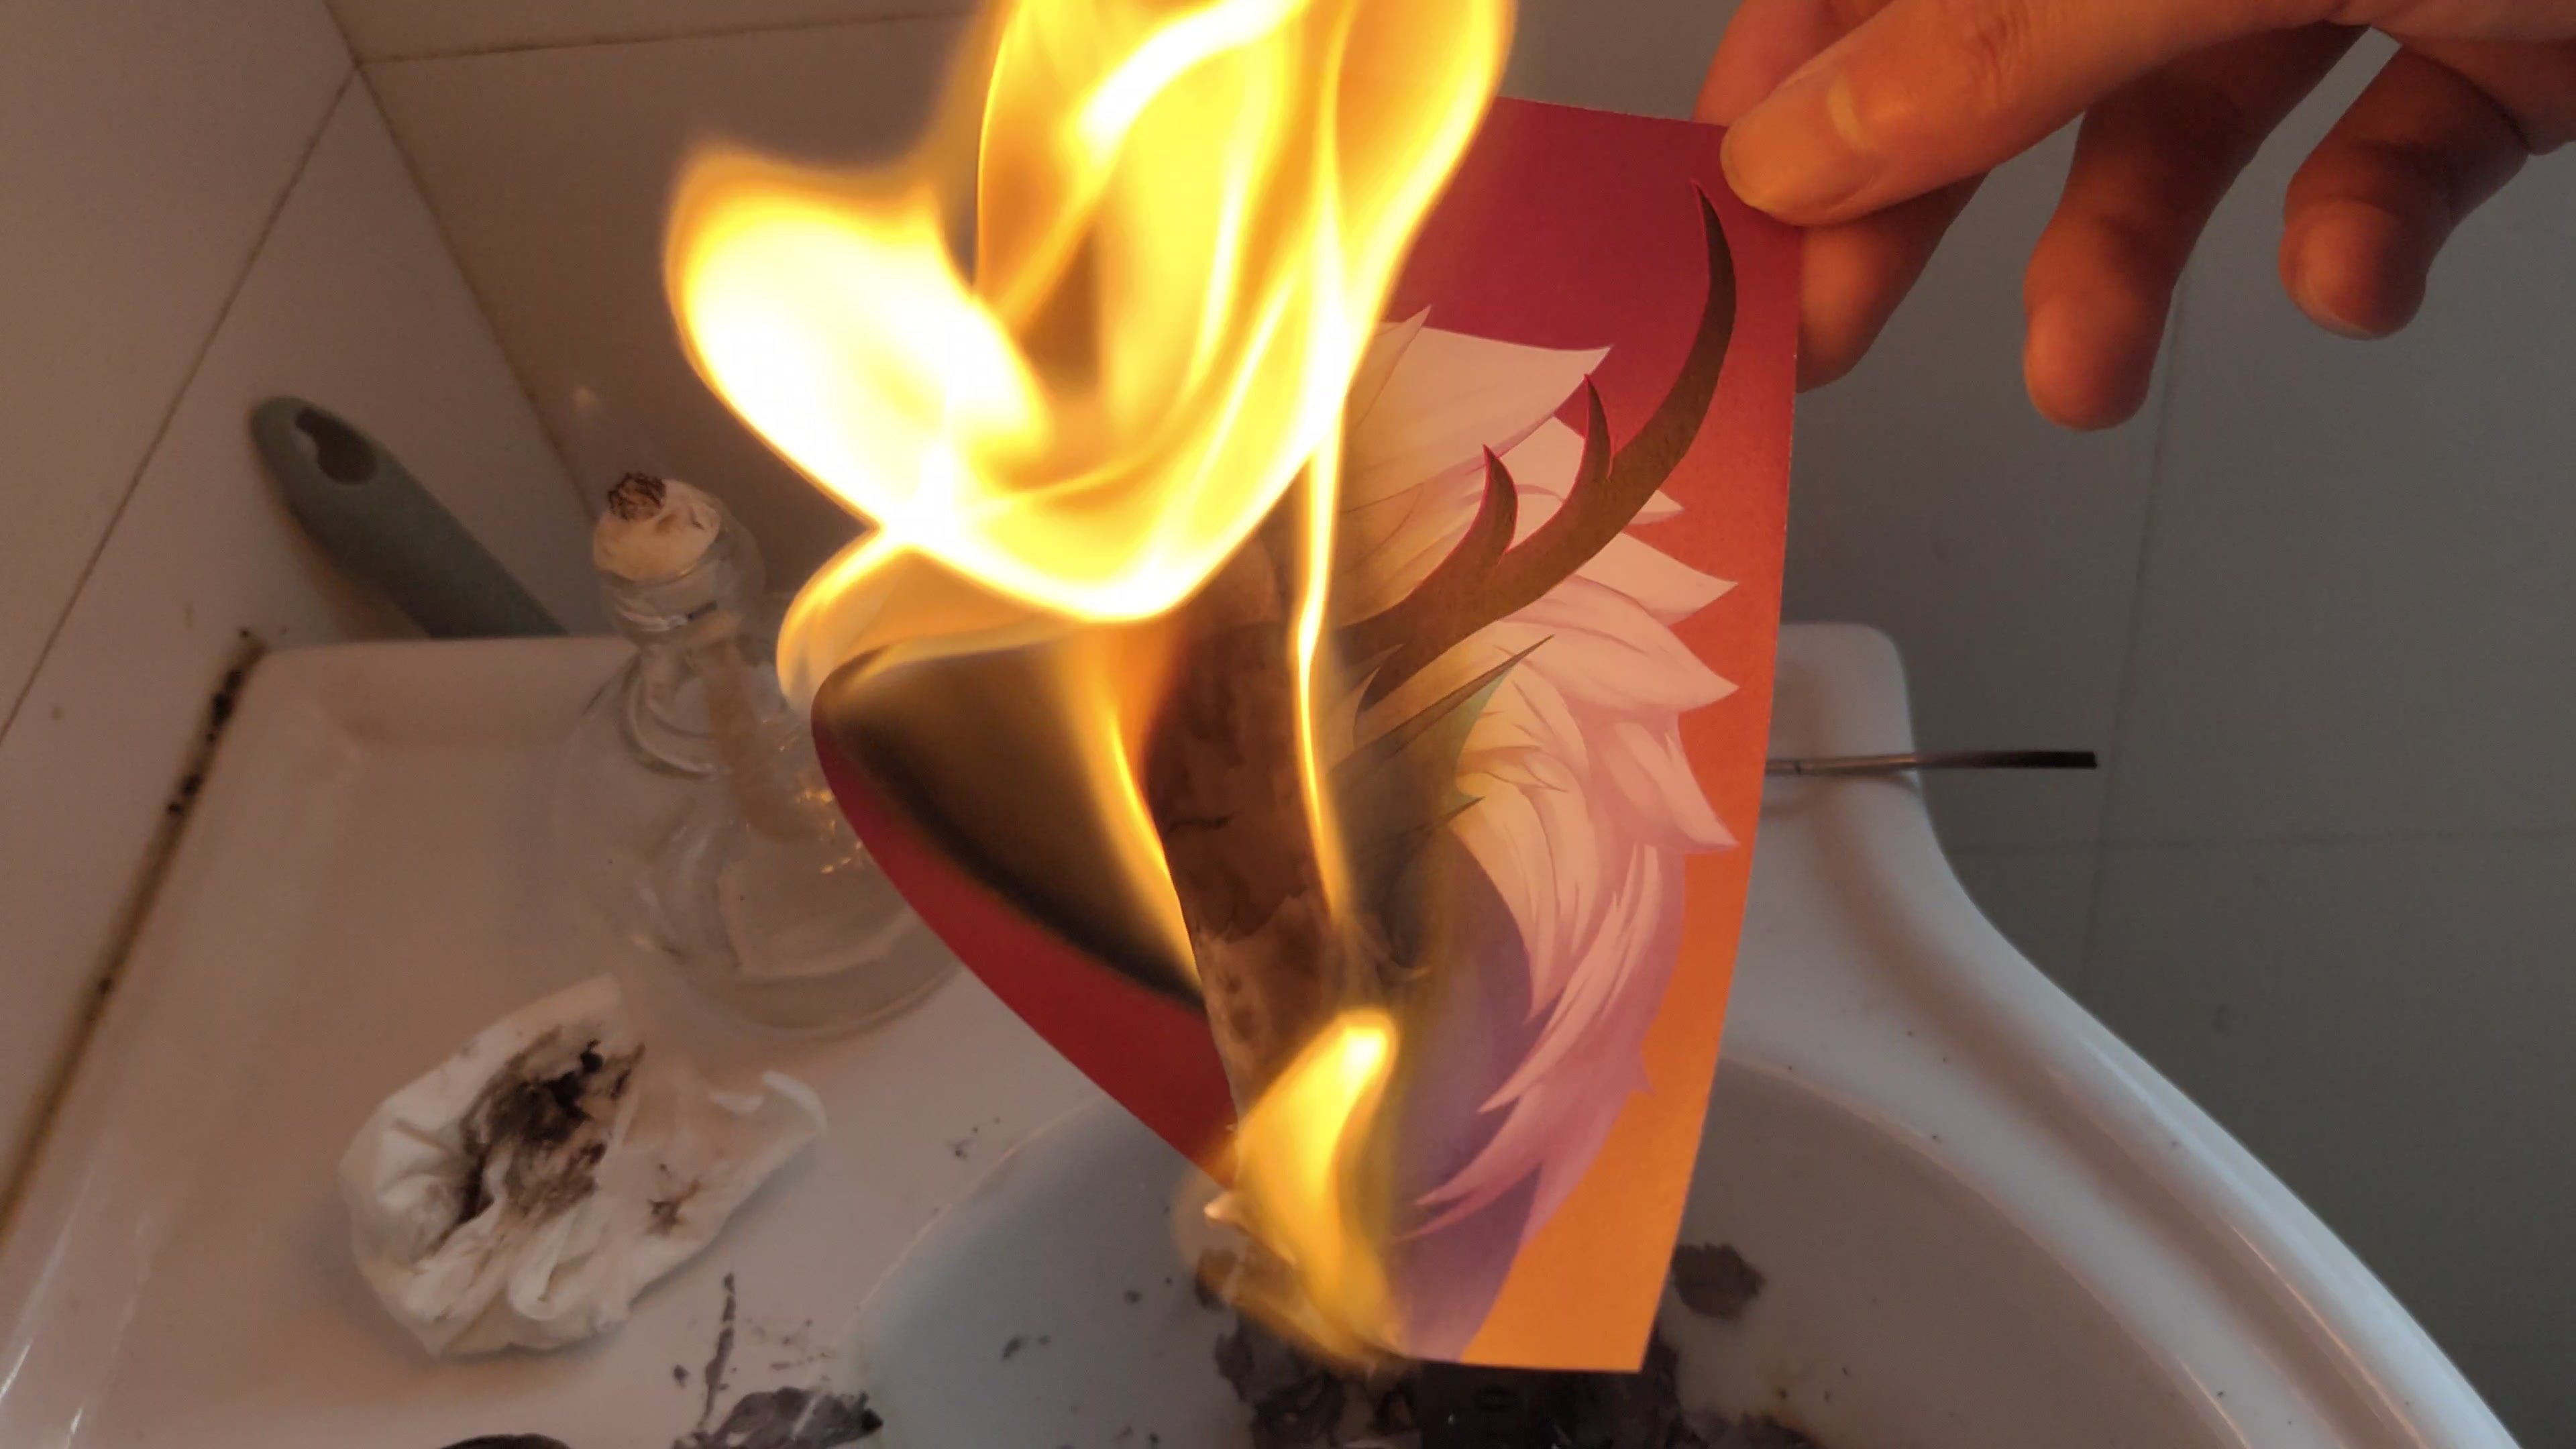 Enjoy the process of incinerating the Furry picture - video 4